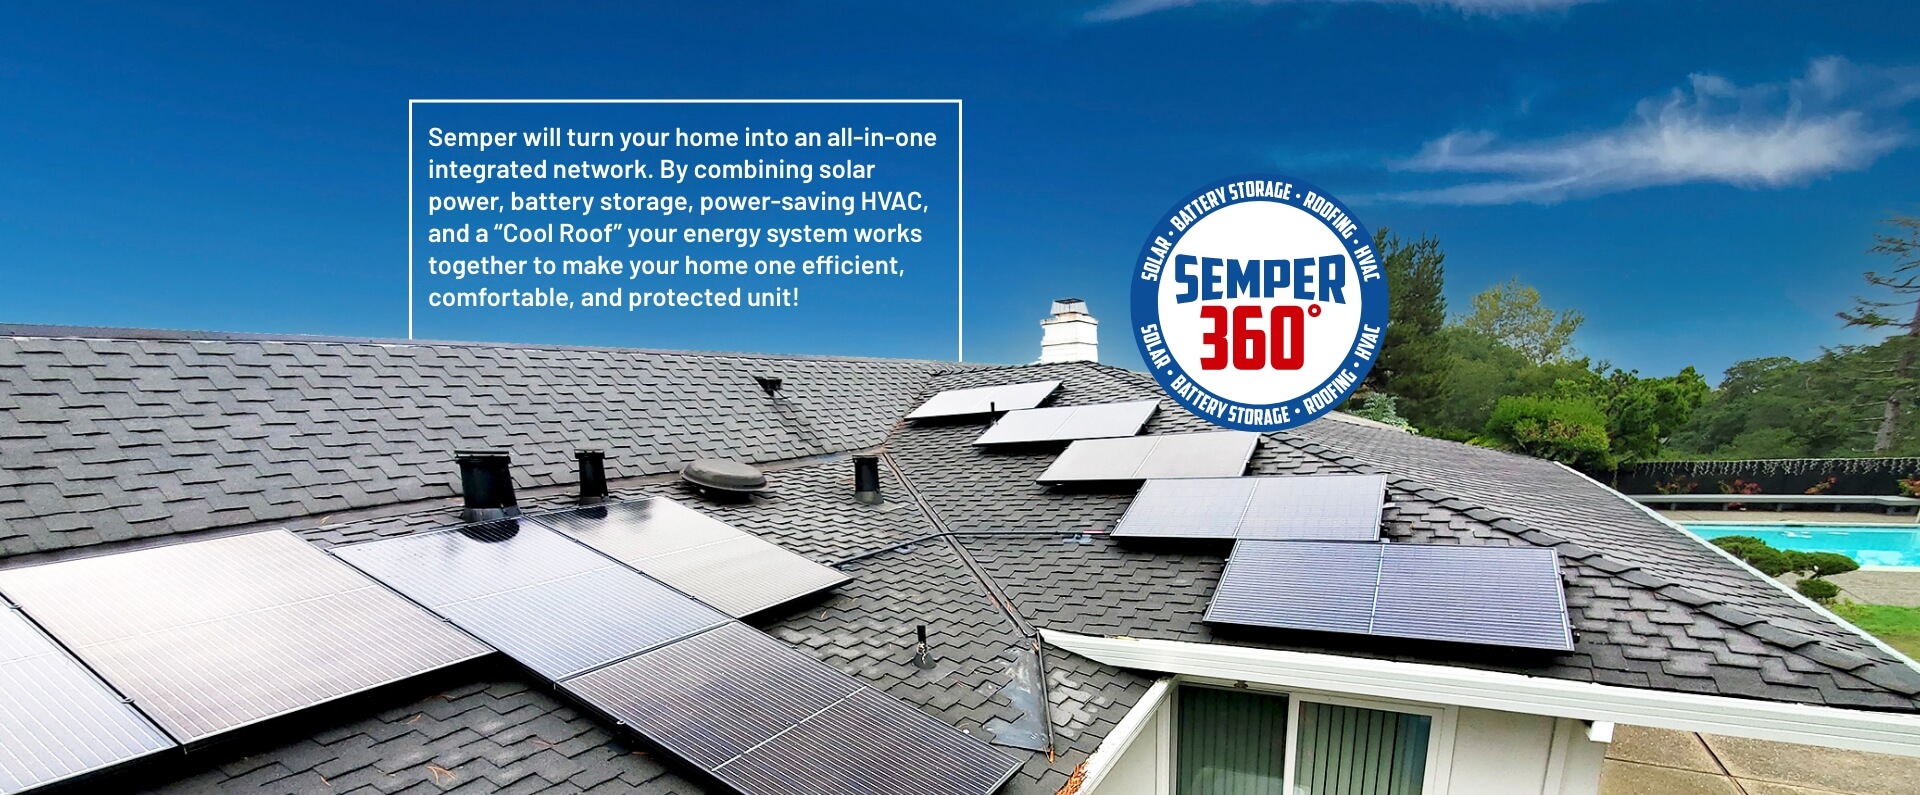 Semper will turn your home into an all in one integrated network. Make you home into one efficient, comfortable, and protected unit by combining solar power, battery storage, a power saving HVAC and a cool roof.